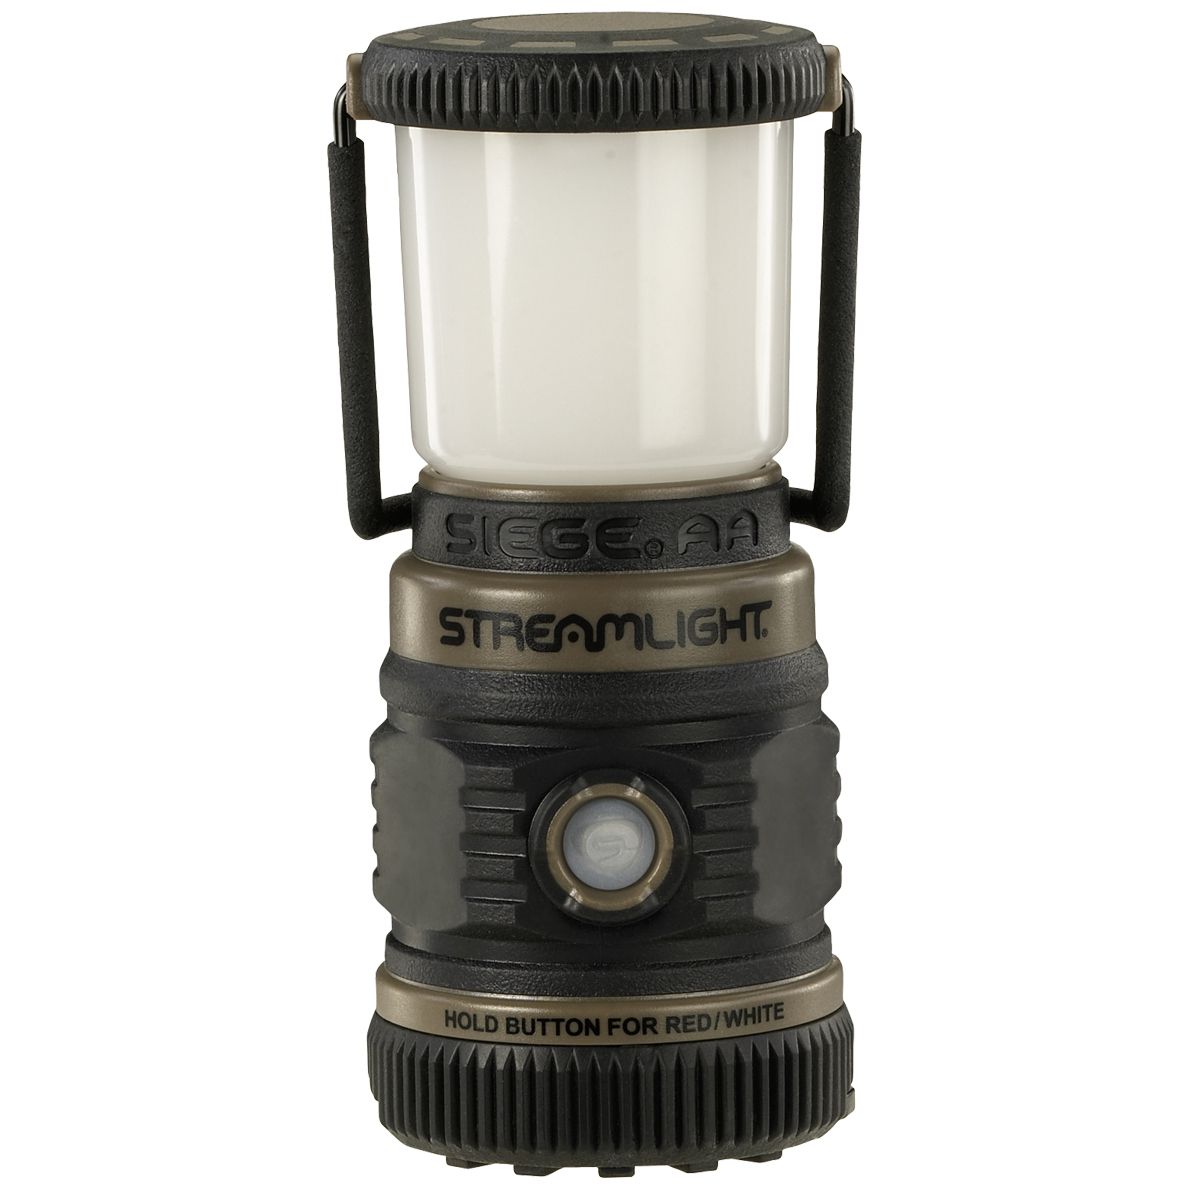 Streamlight Siege AA Lamp - extremely robust & waterproof outdoor lantern - tactical light with 200 lumens